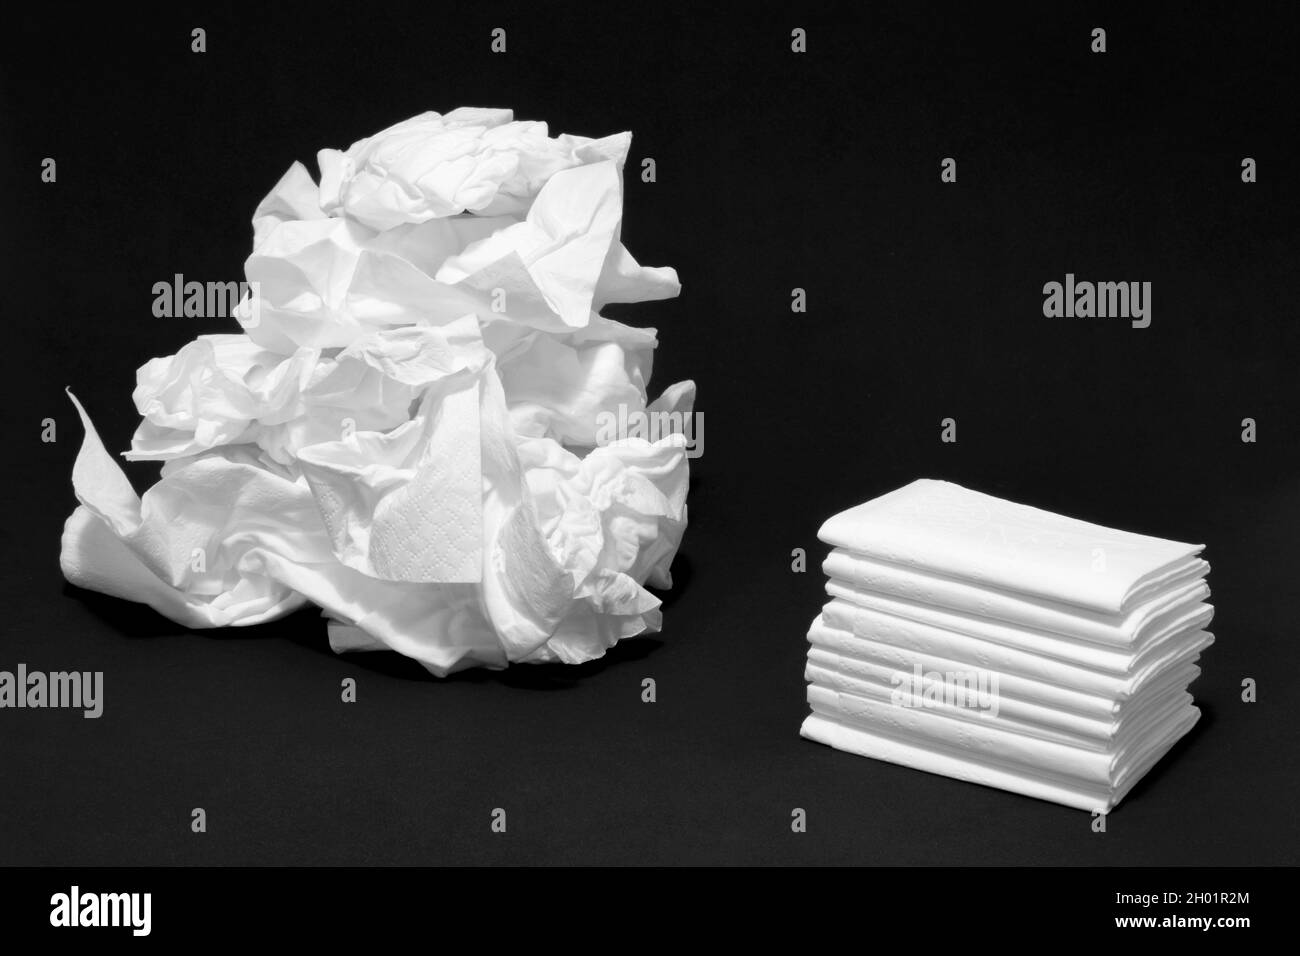 Used and new tissues. Concept of sick, flu and cold, crying, untidy, masturbation. Stock Photo